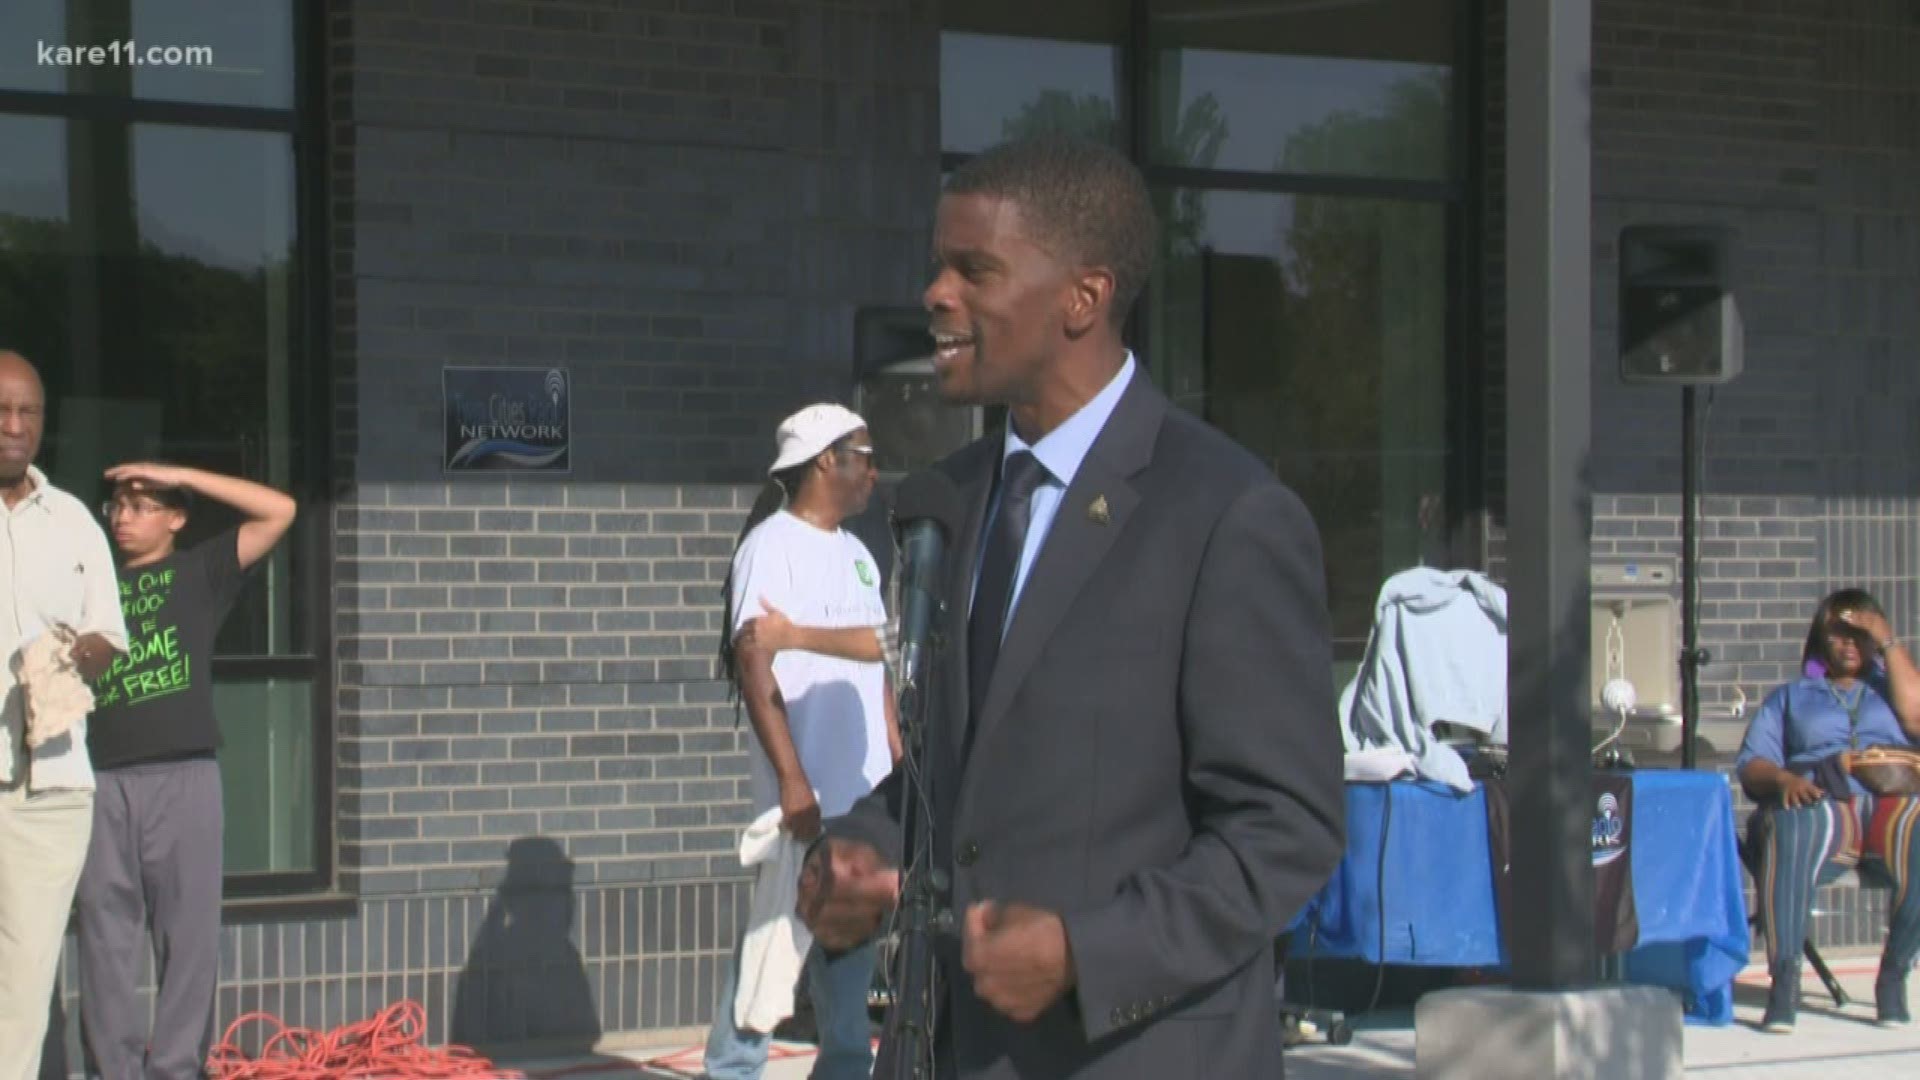 Mayor Melvin Carter said it's about investing in both the police as well as the community.